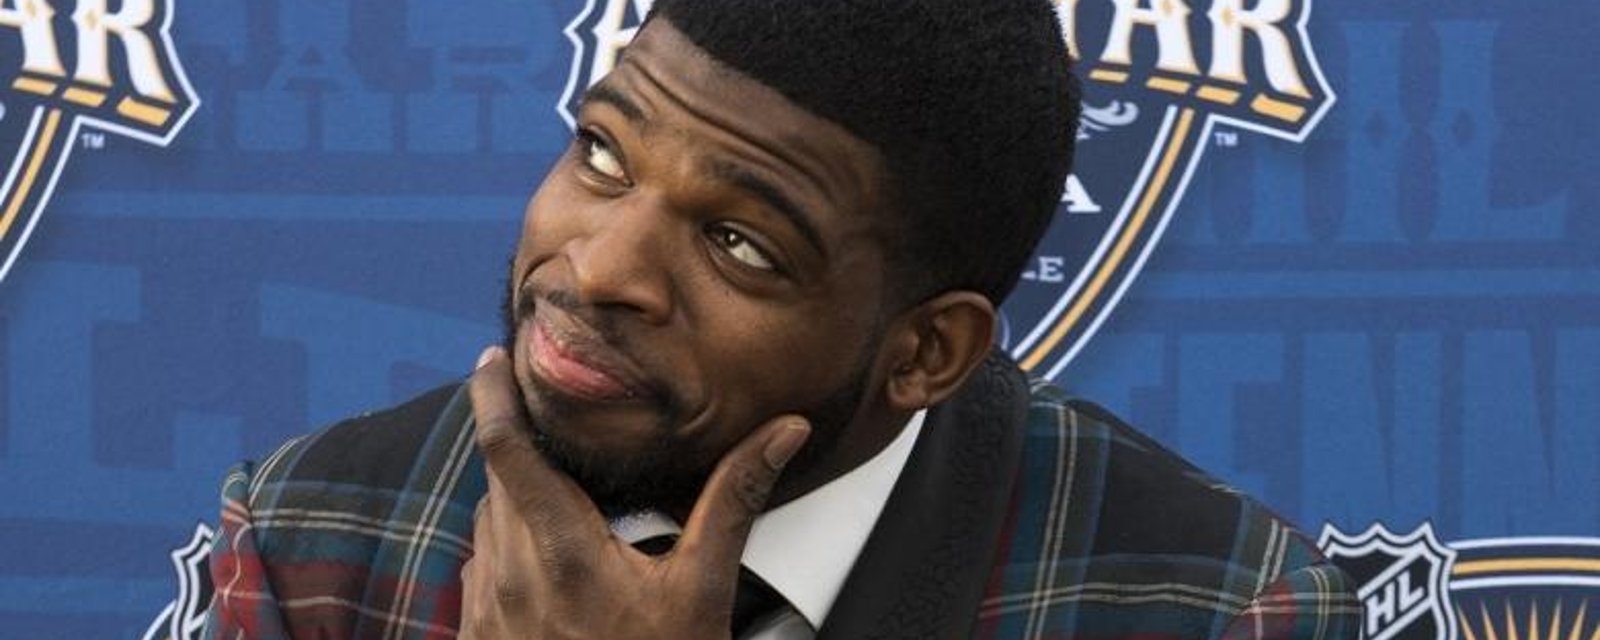 Reports already surfacing of problems with Subban in Nashville locker room.